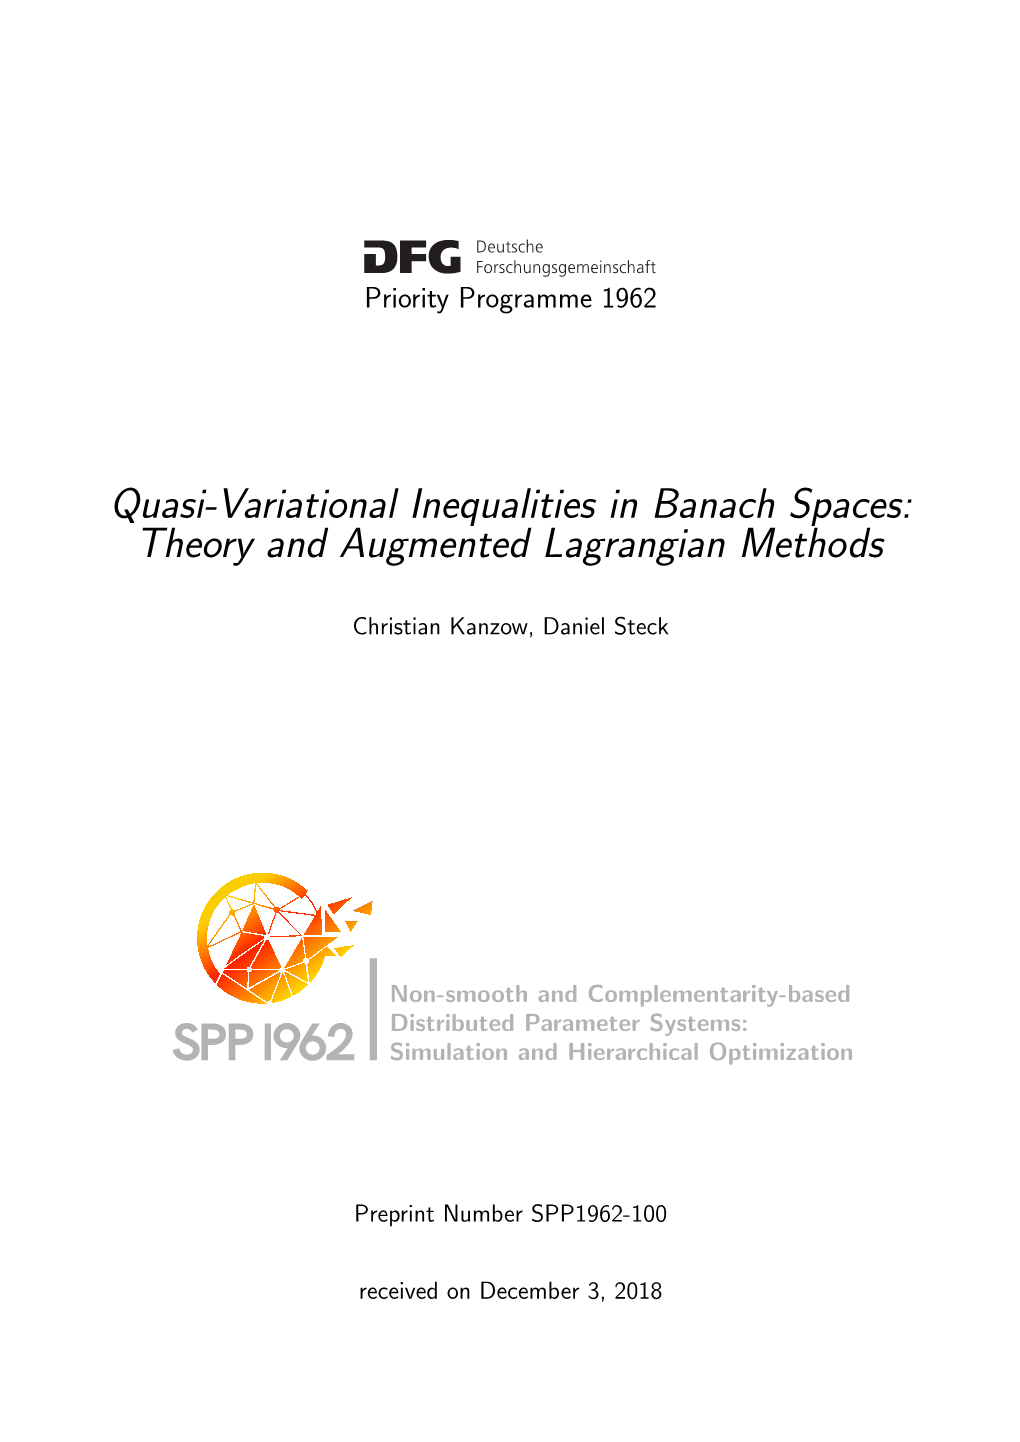 Quasi-Variational Inequalities in Banach Spaces: Theory and Augmented Lagrangian Methods